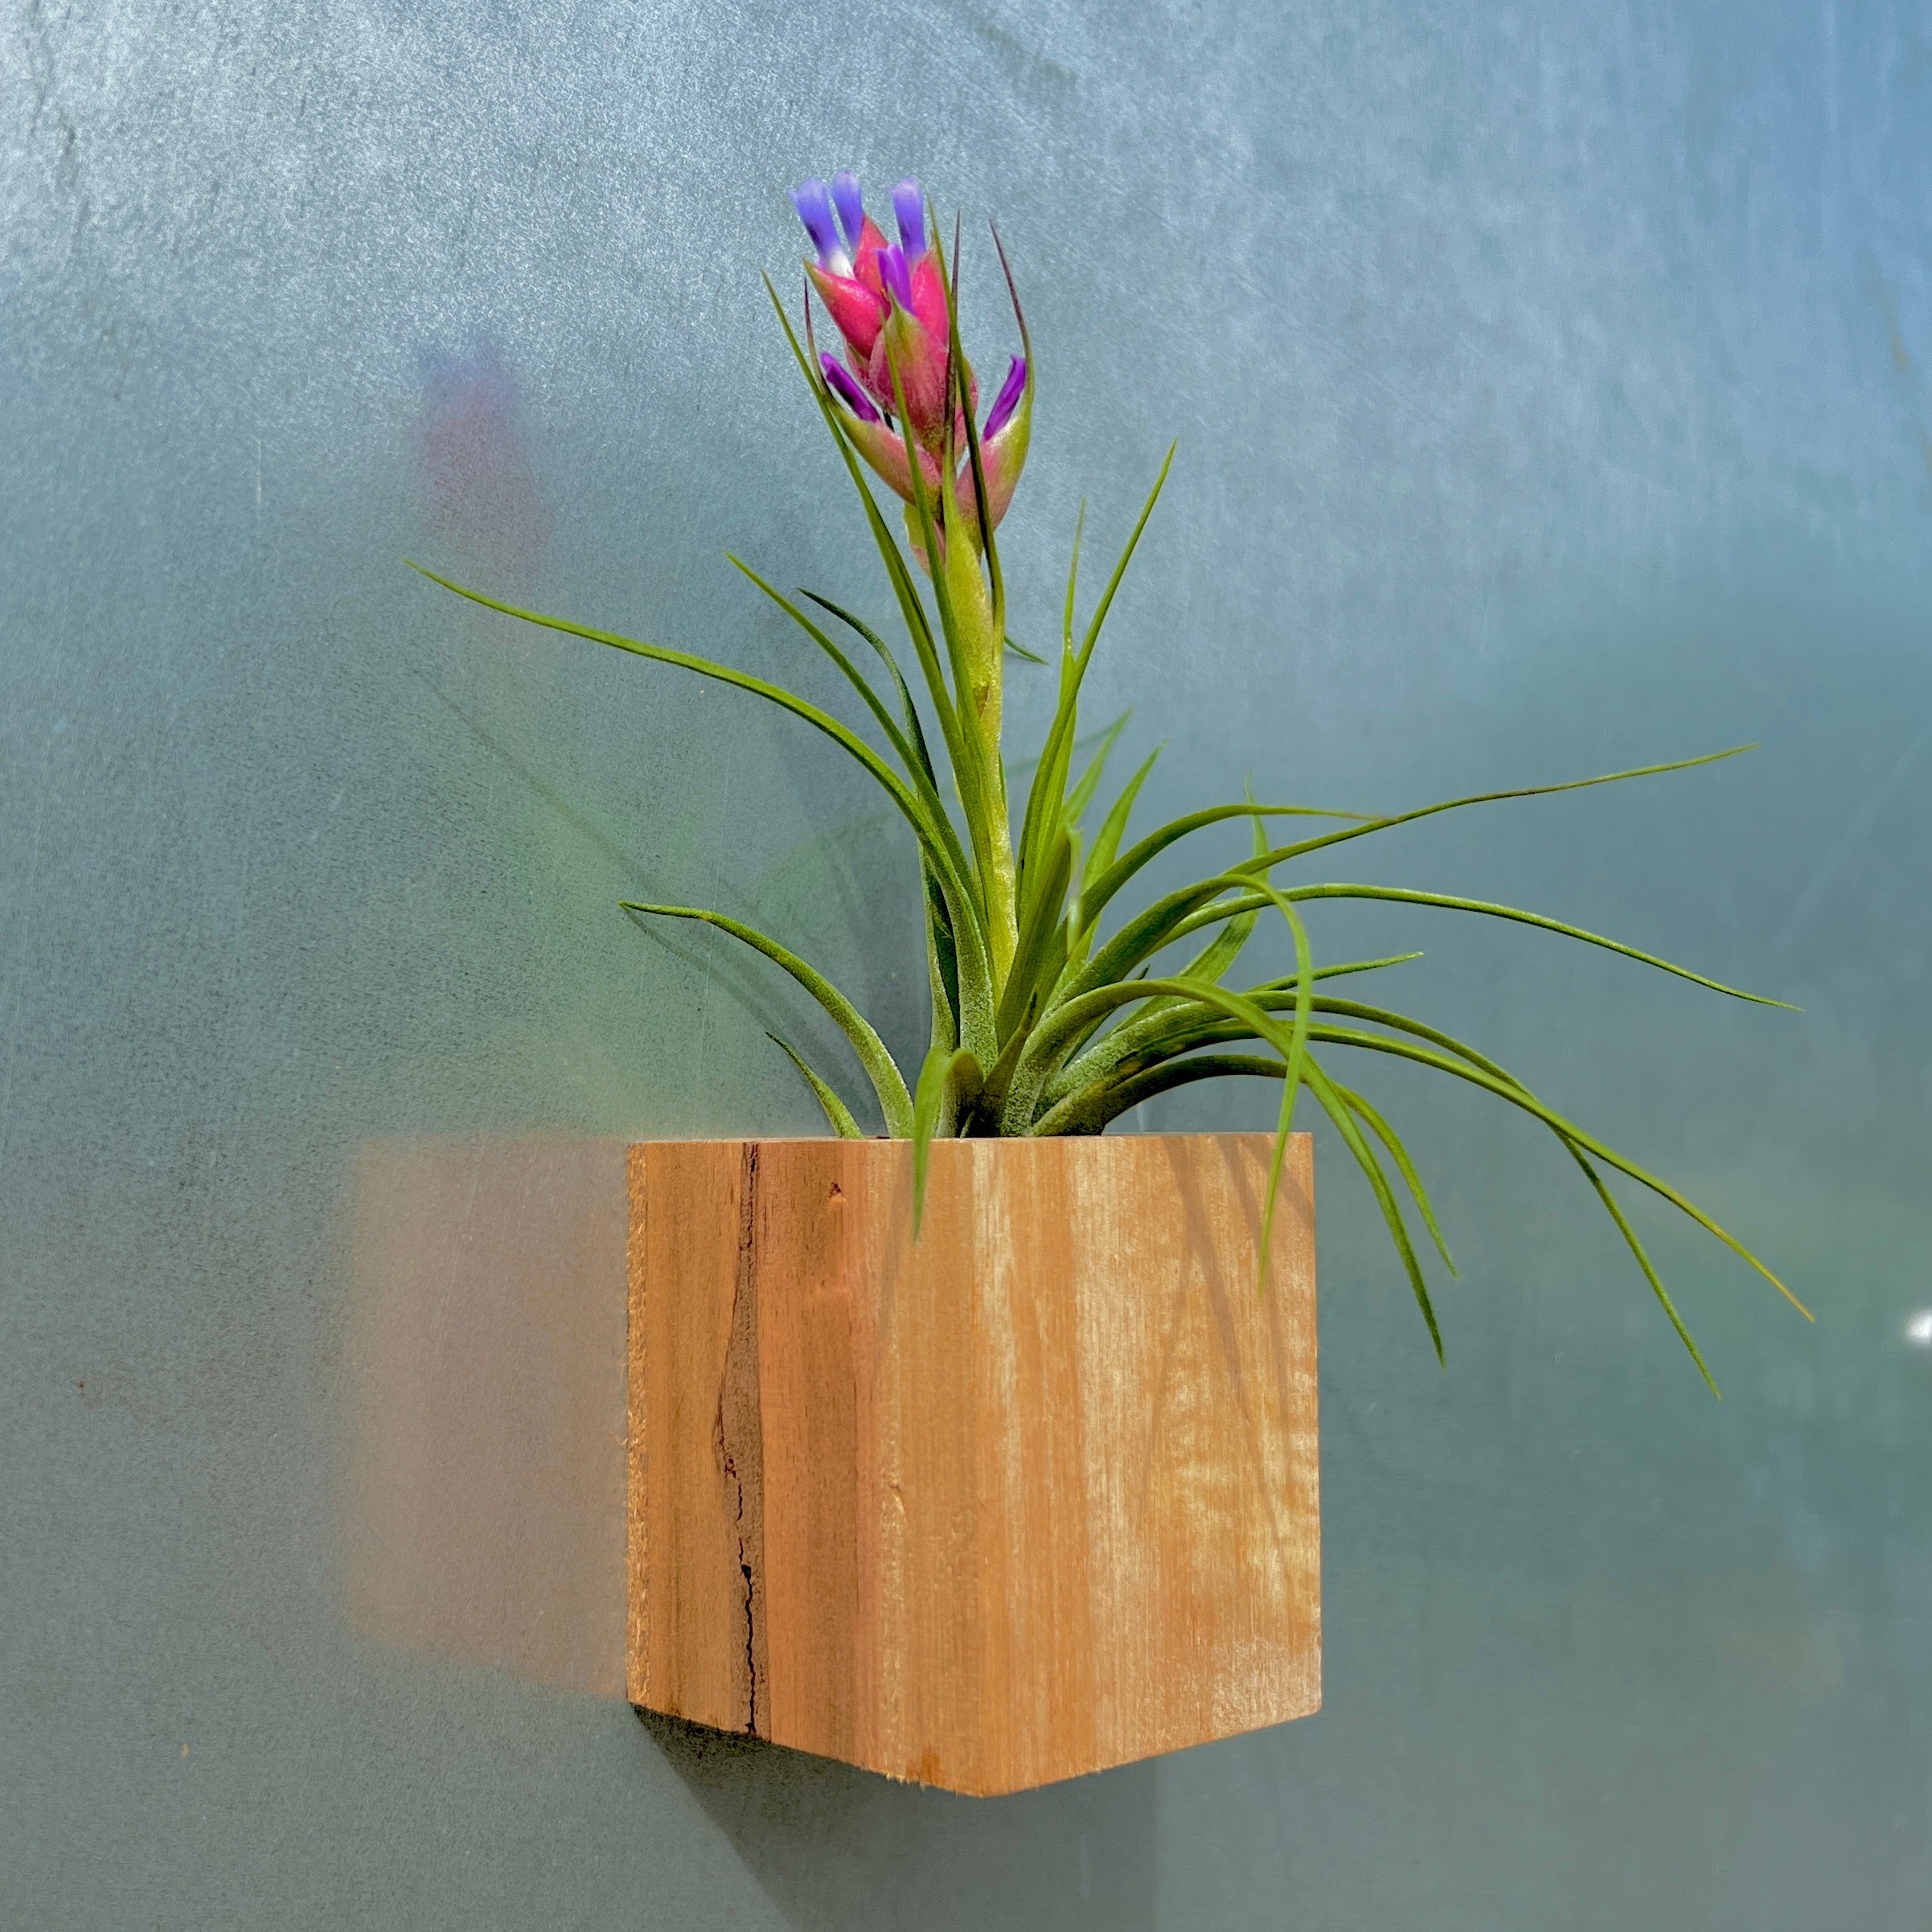 Wholesale Handcrafted Wooden Magnet Air Plant Holder <br> (No Minimum)